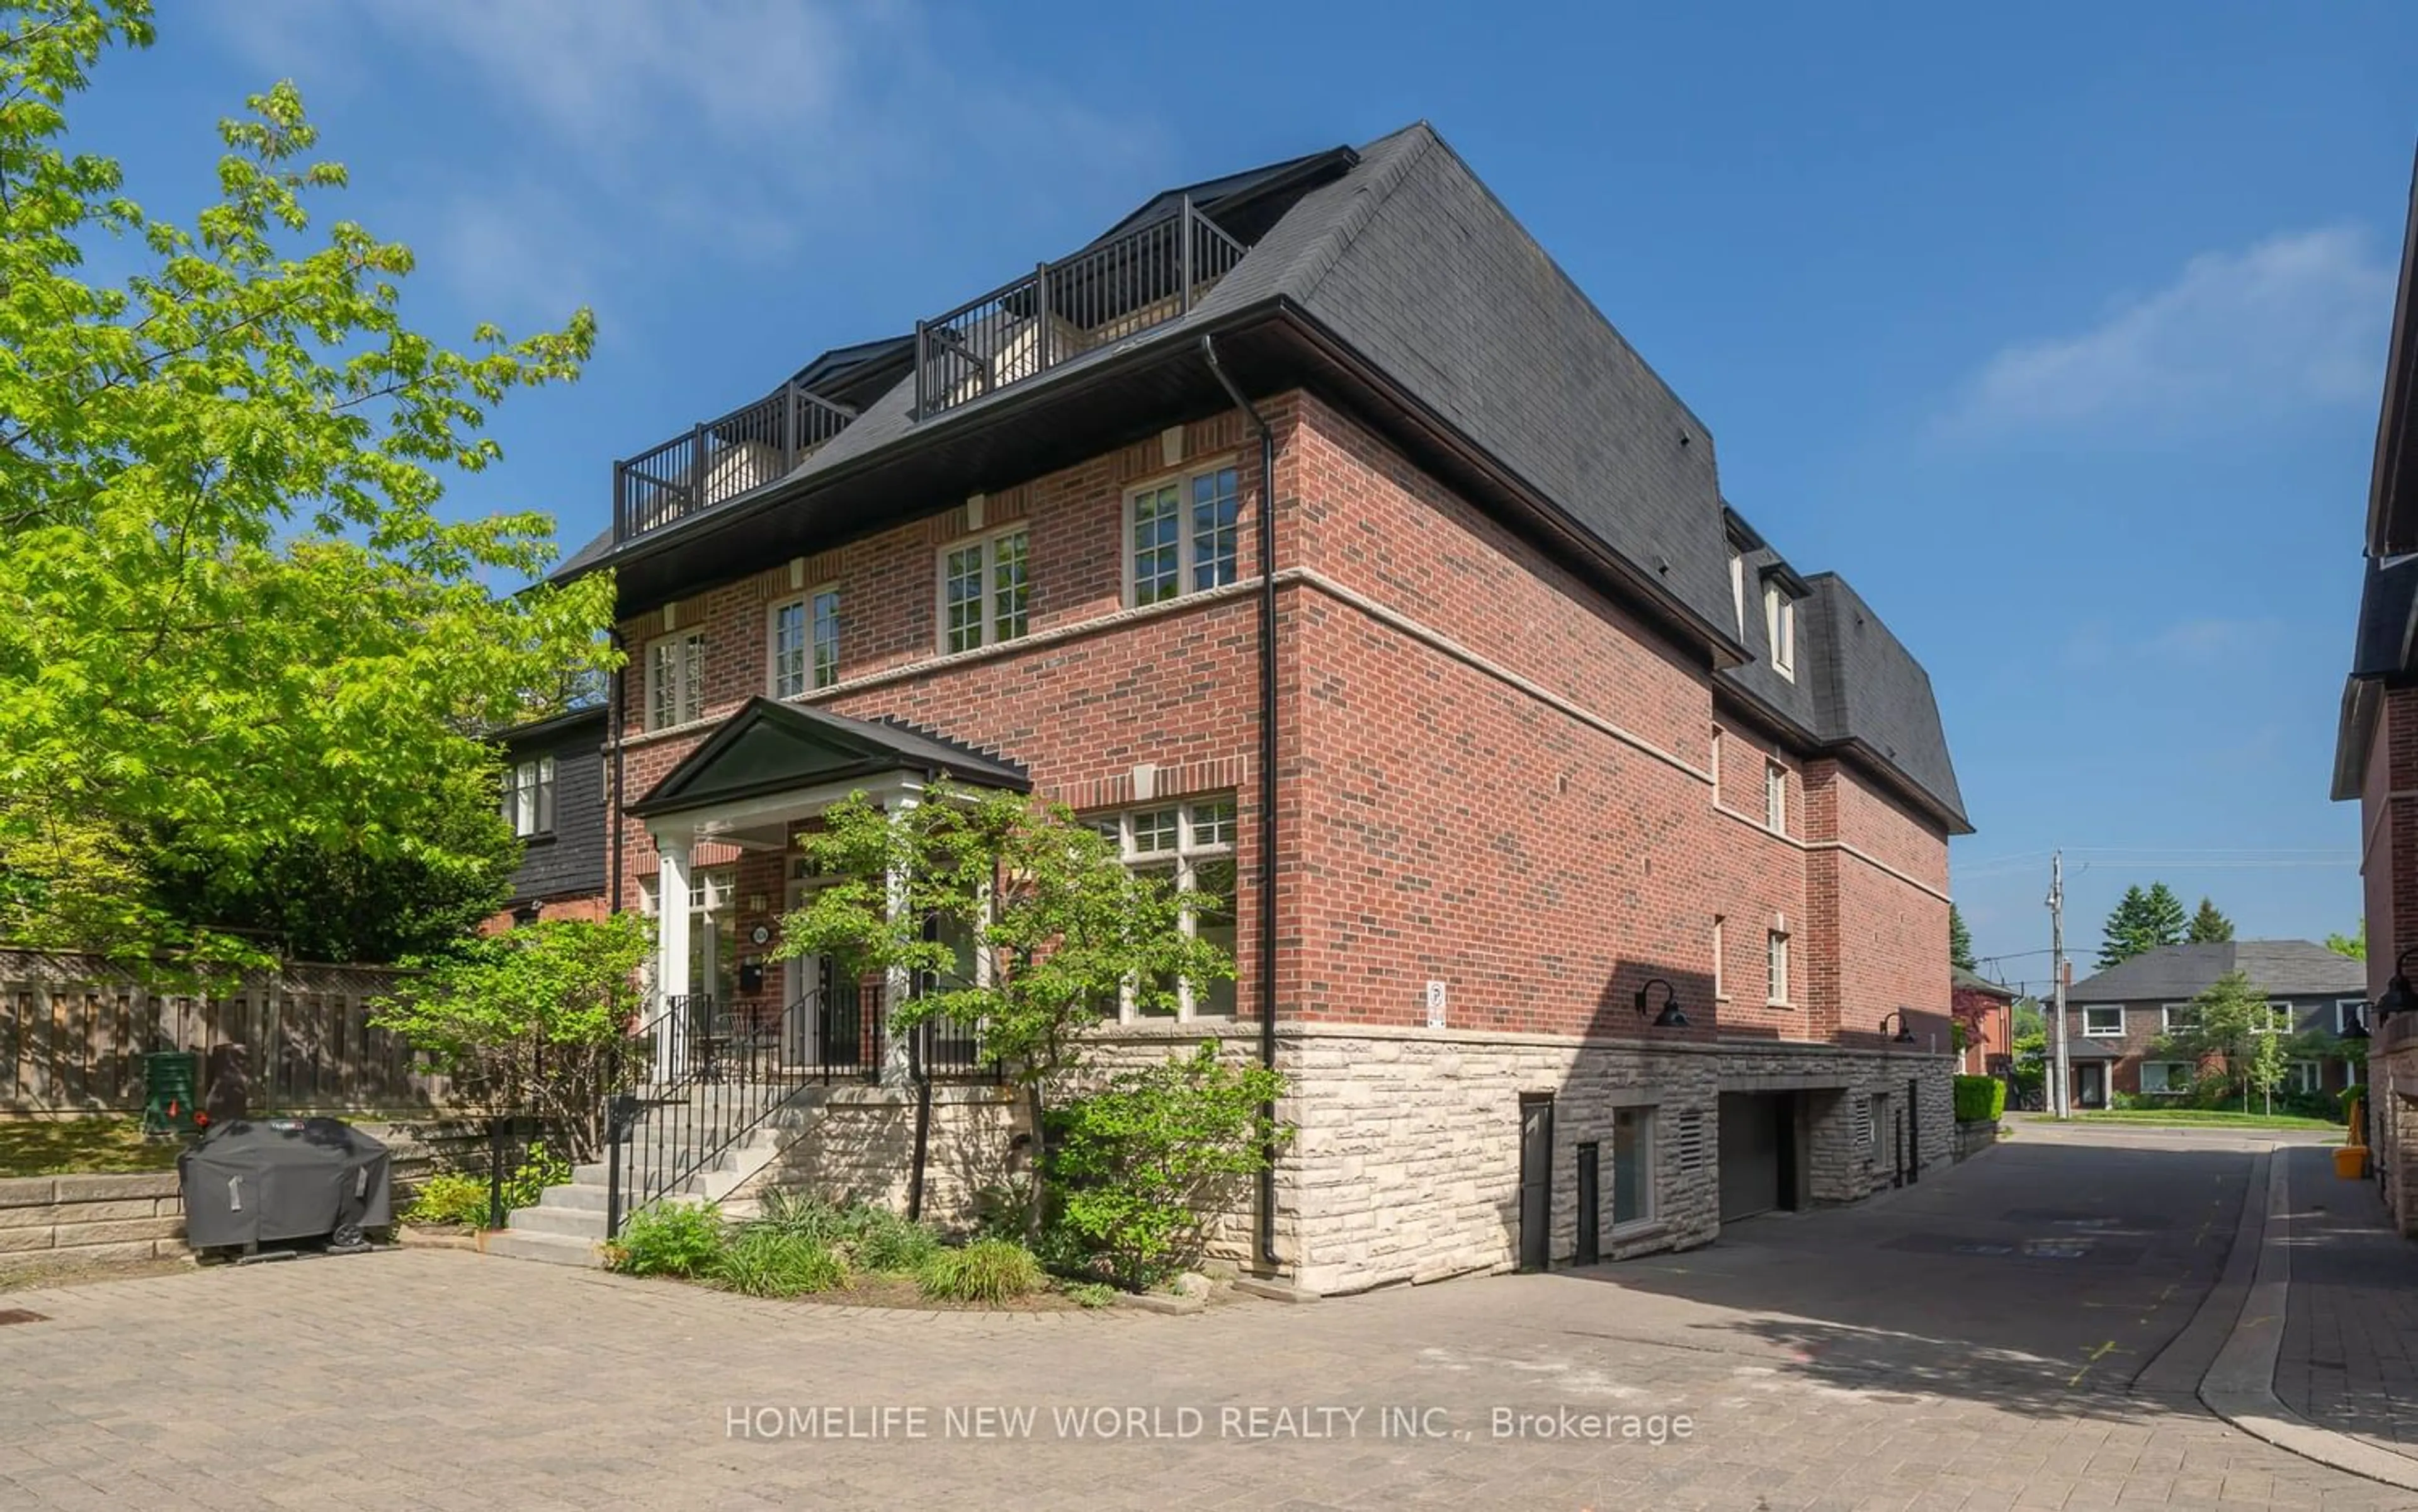 Home with brick exterior material for 363B Roehampton Ave, Toronto Ontario M4P 1S3